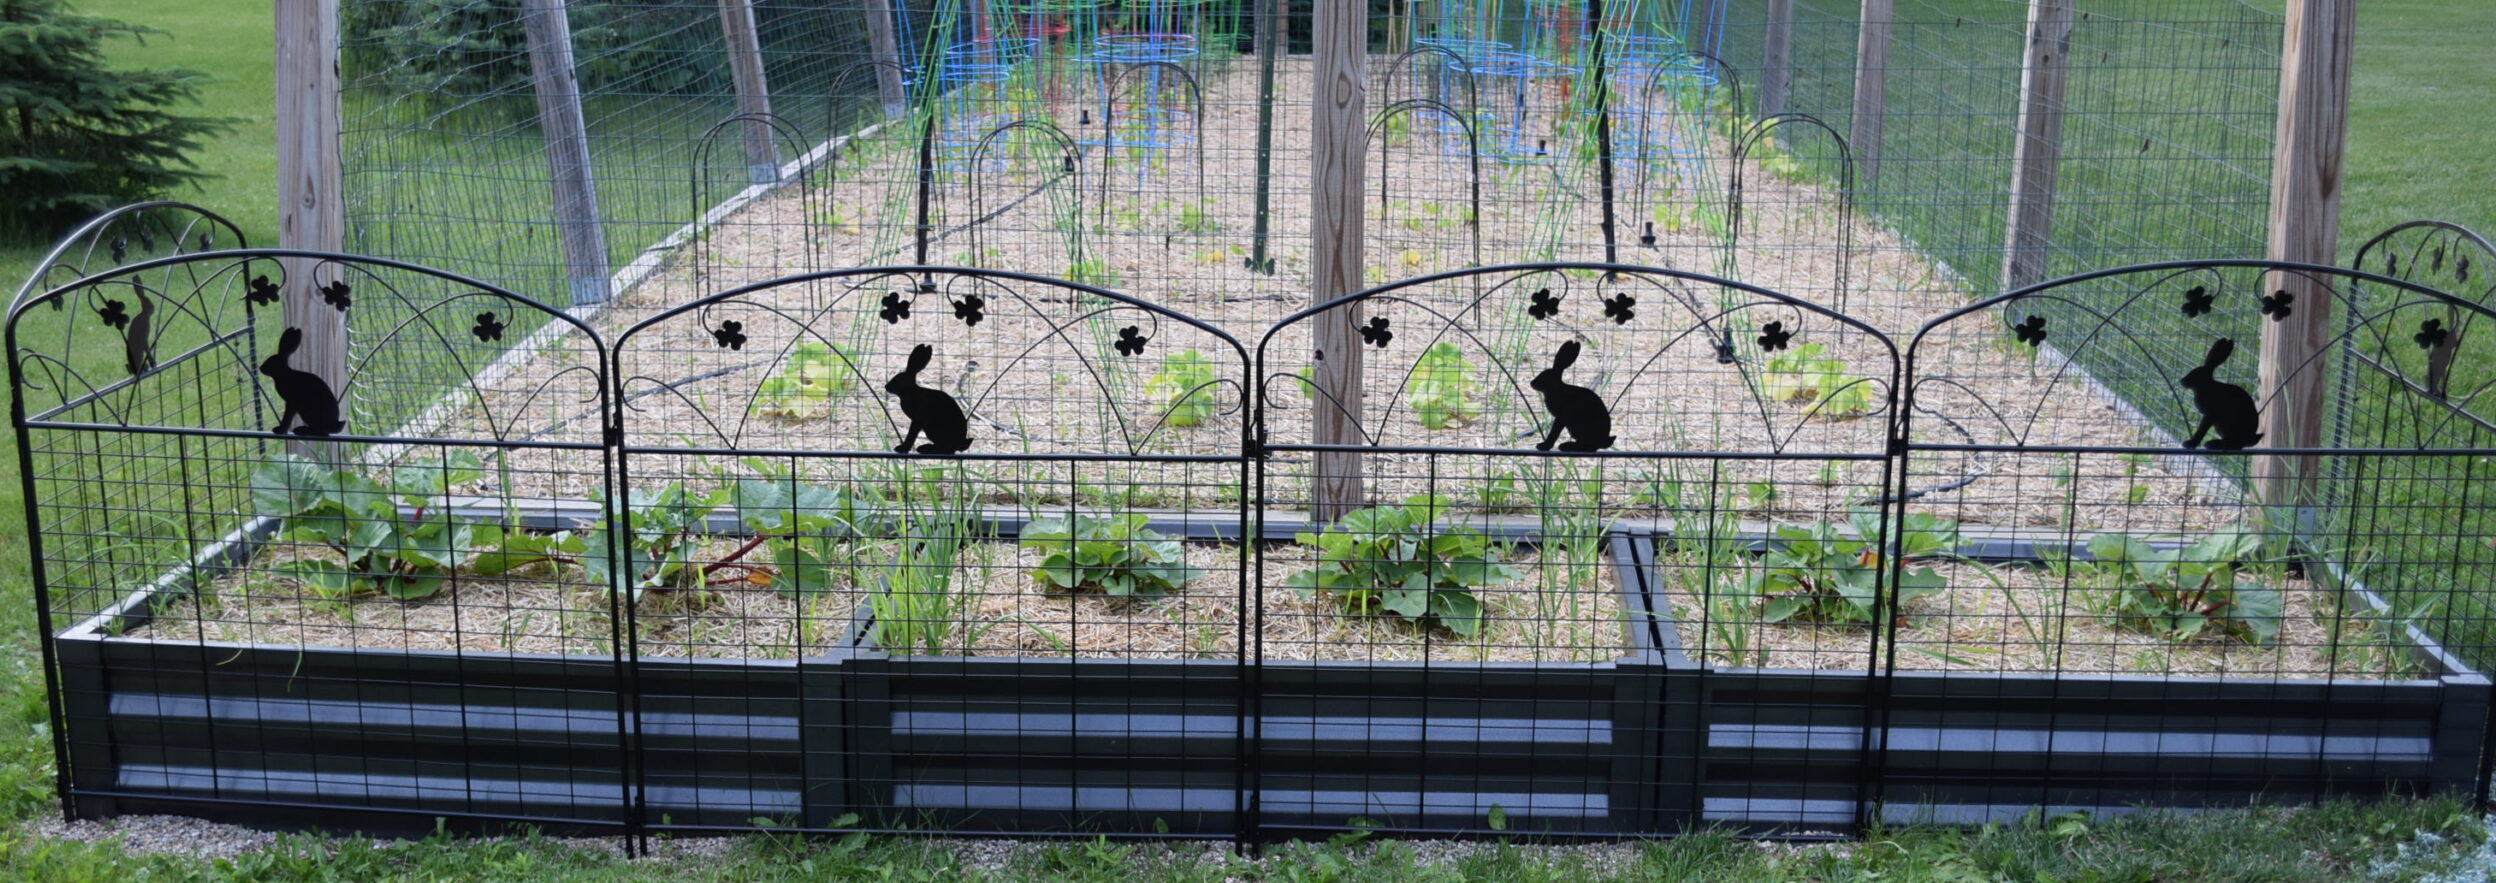 Raised Garden Beds with Rabbit Guard Panels